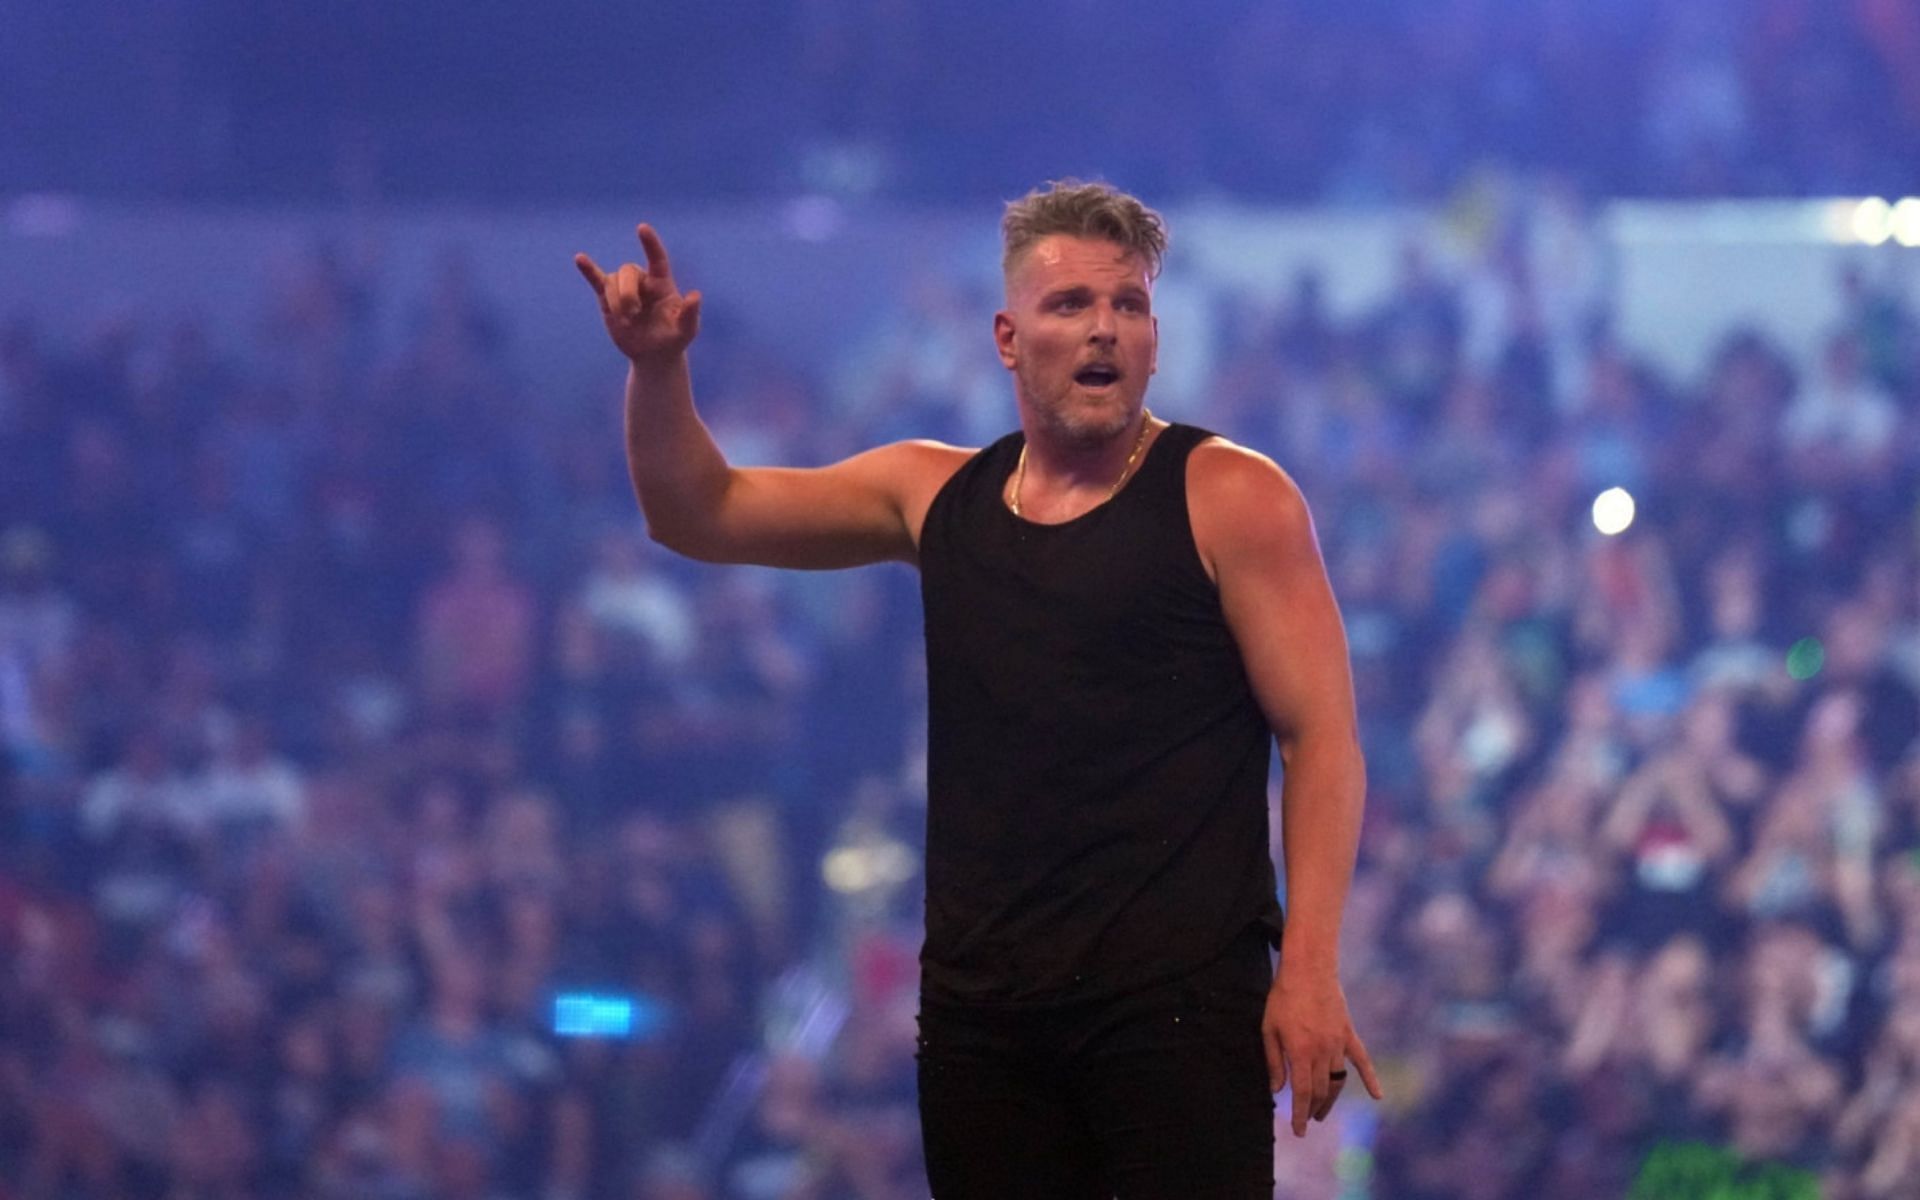 Pat McAfee competed at WrestleMania 38!